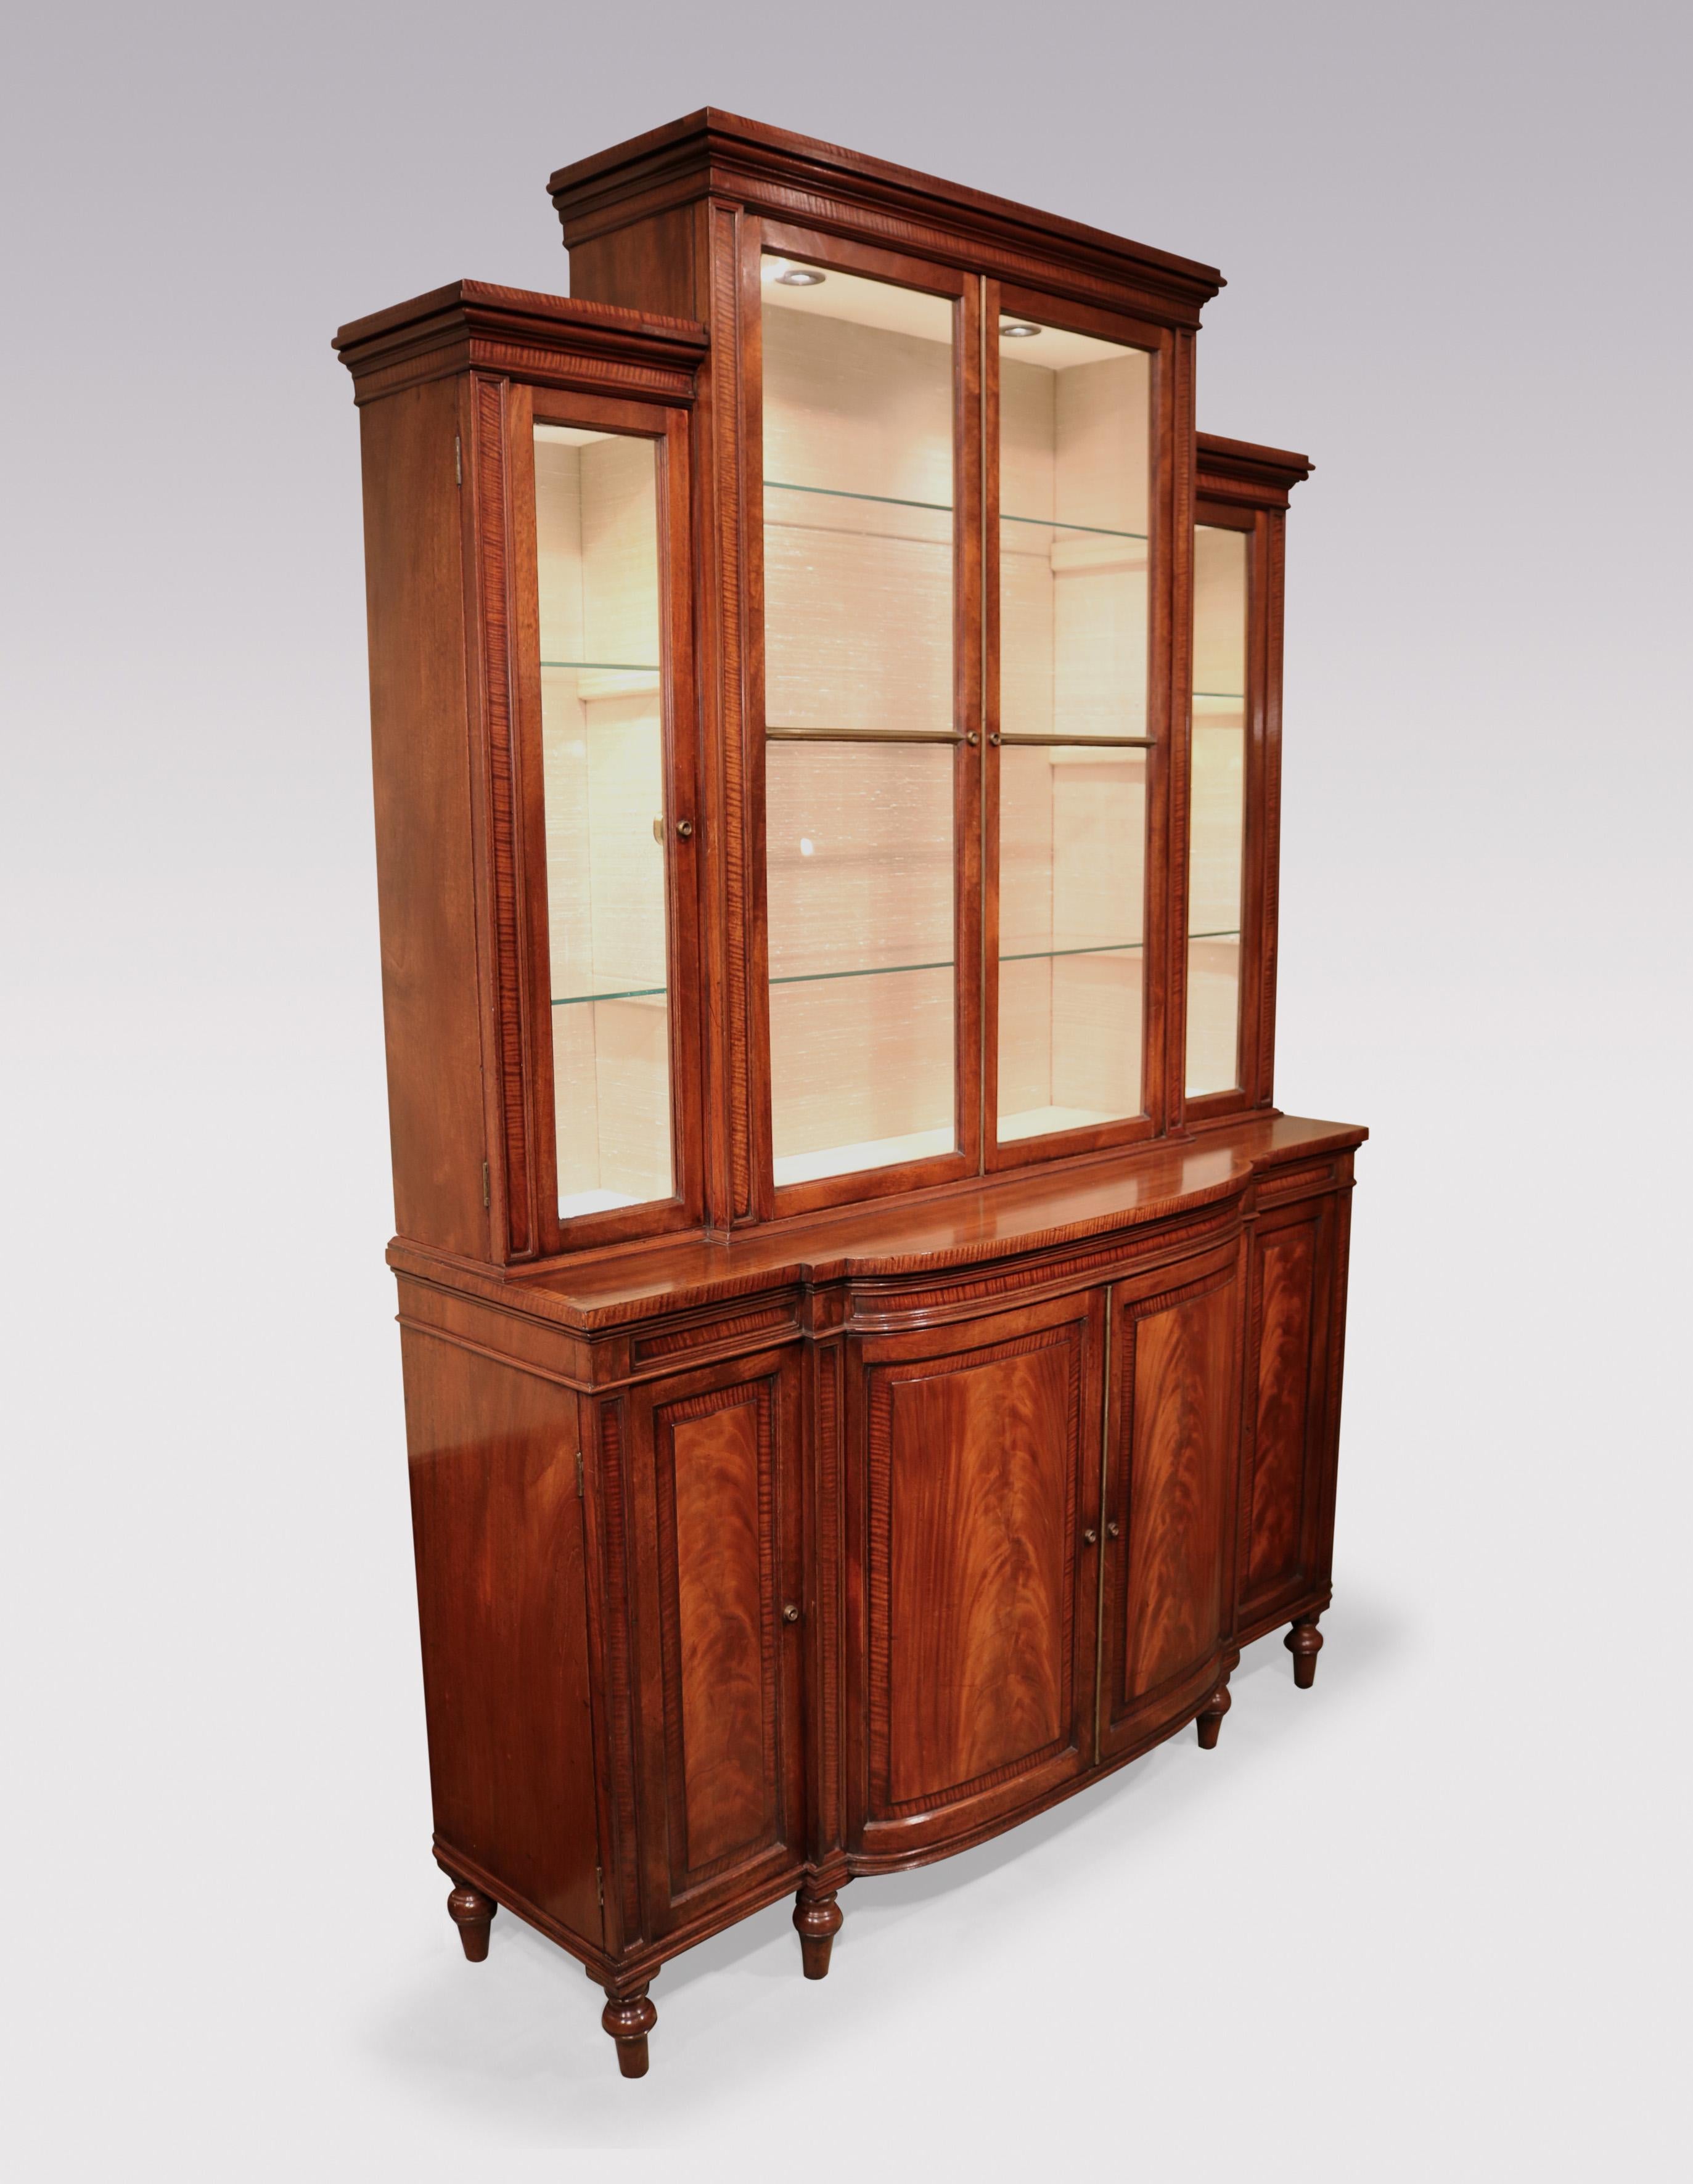 A fine quality George III period mahogany & fiddle back mahogany Display Bookcase of attractive small proportions, having breakfront top section above bow fronted base with plain figured panelled cupboard doors below, supported on short turned